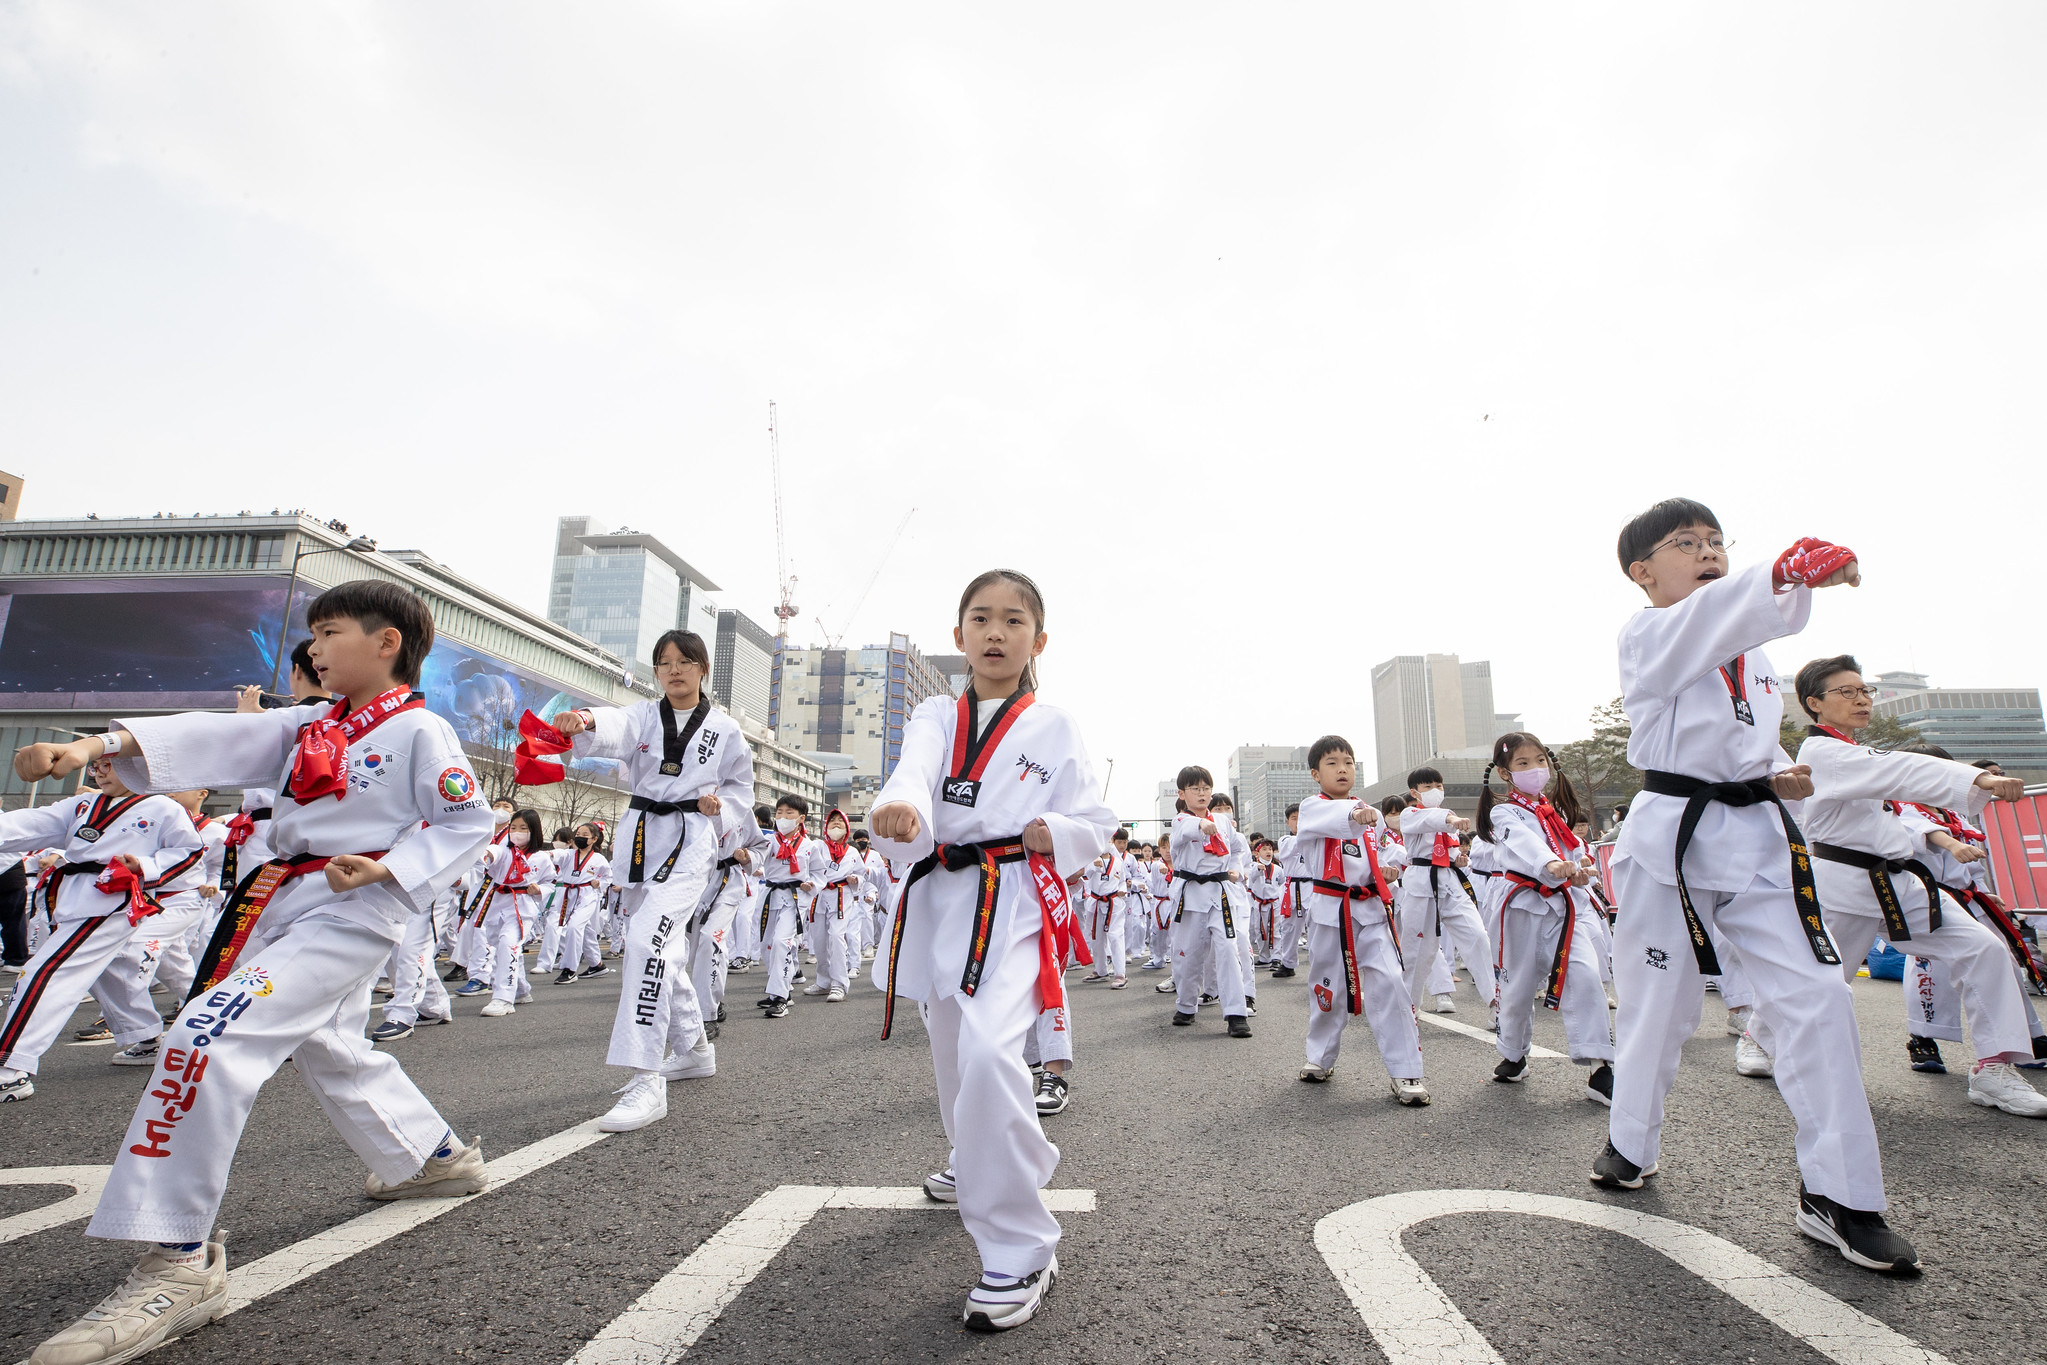 Children at the 2023 Kukki Taekwondo Hanmaeum Grand Festival on March 25 are among those doing poomsae (form) to set a Guinness World Record for the largest number of people doing a form simultaneously at Gwanghwamun Square in Seoul.